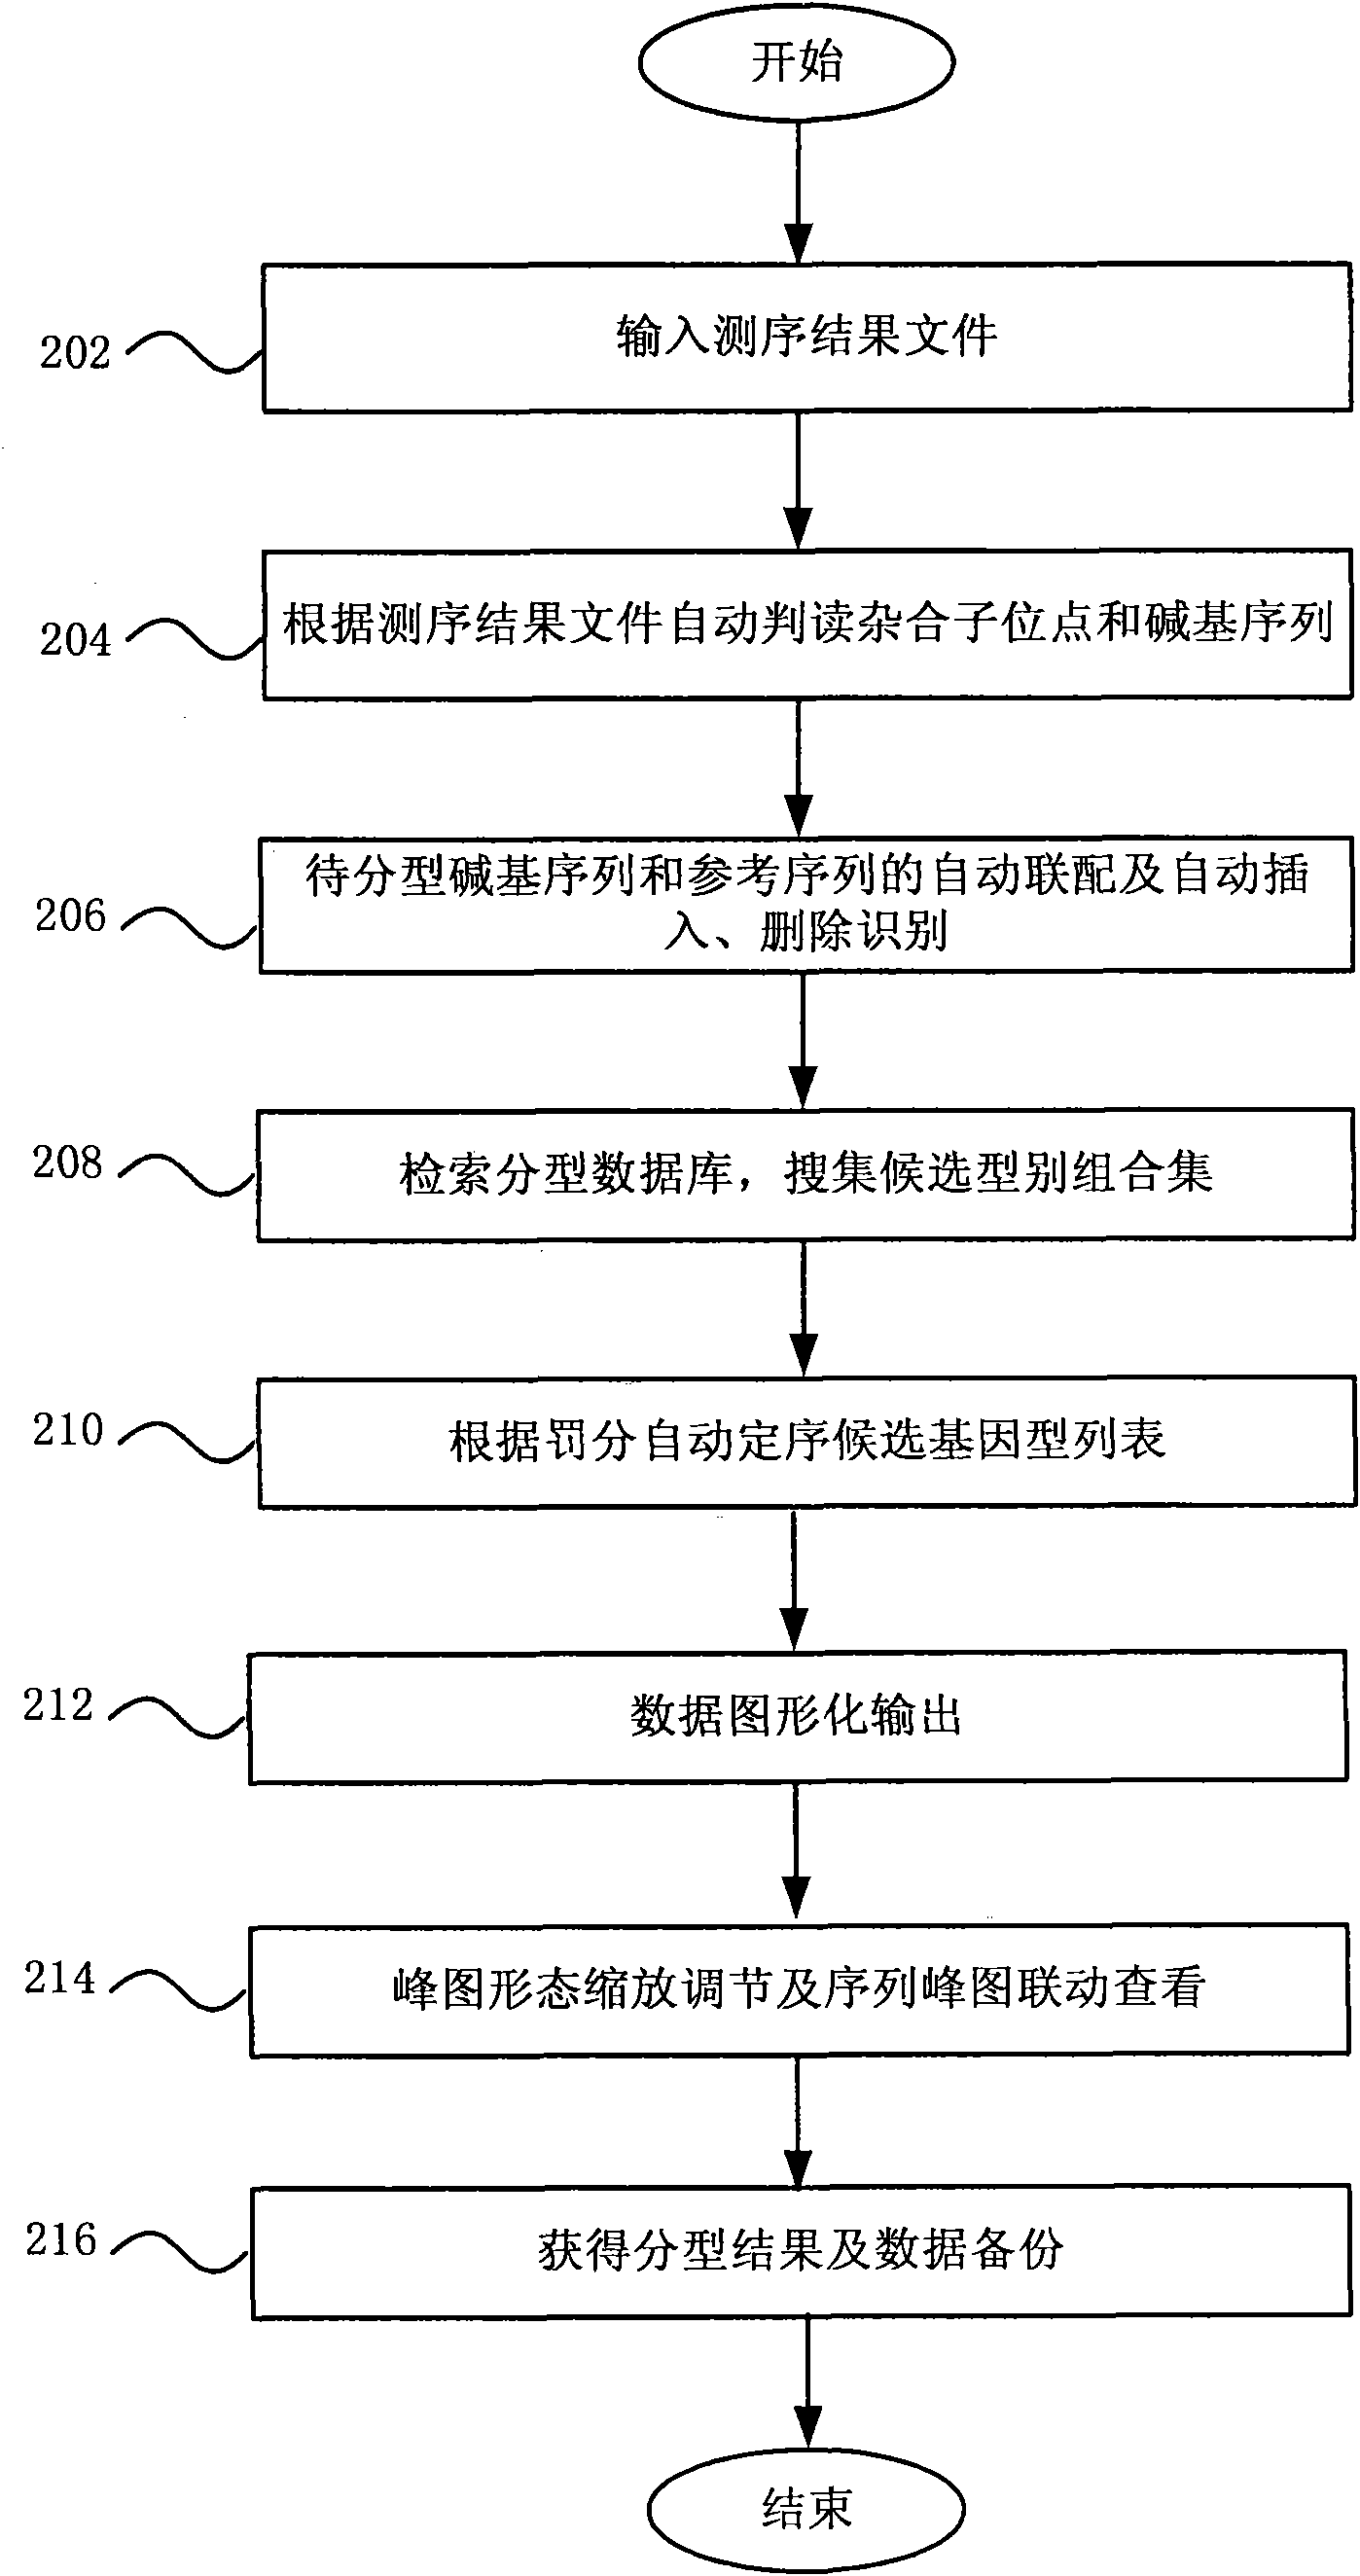 Method and system for implementing typing based on polymerase chain reaction sequencing